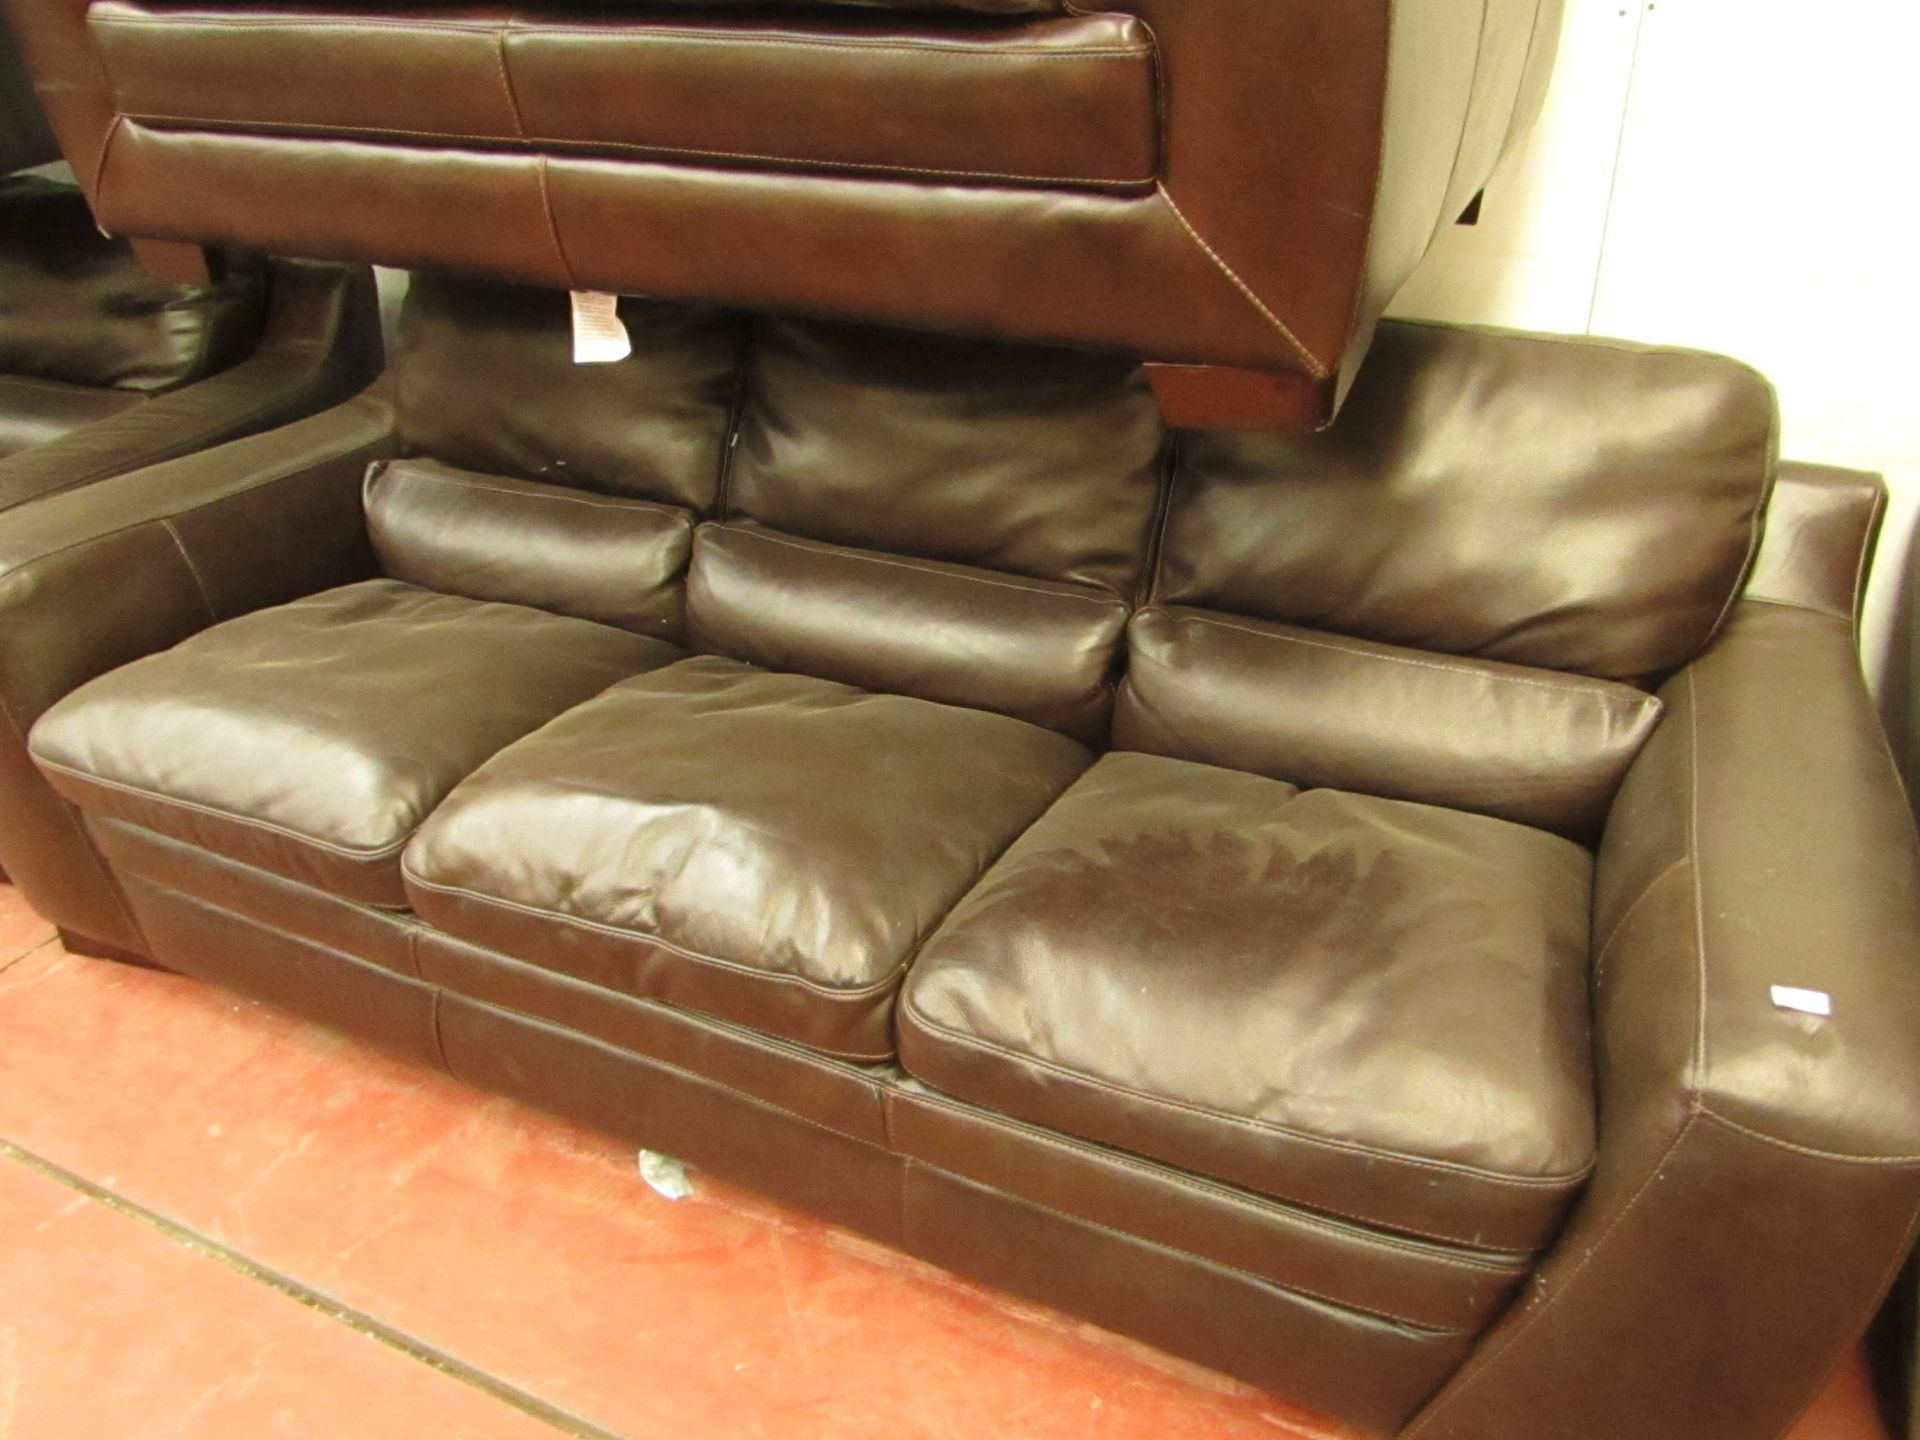 Brown leather 3 seater sofa with no visible damage.